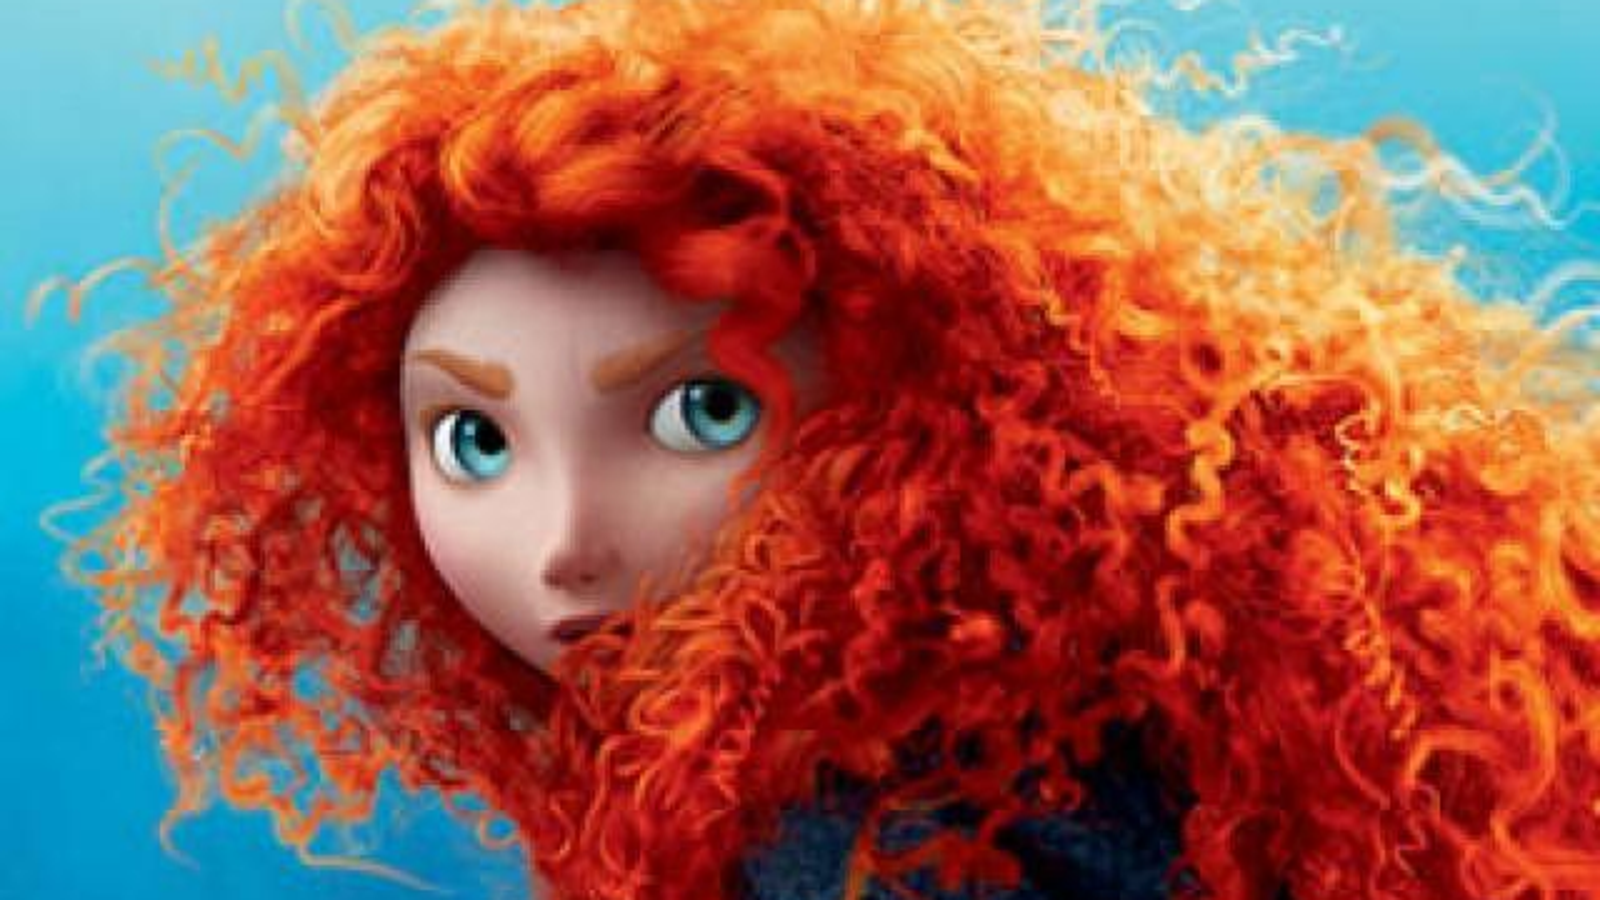 brave characters in movies